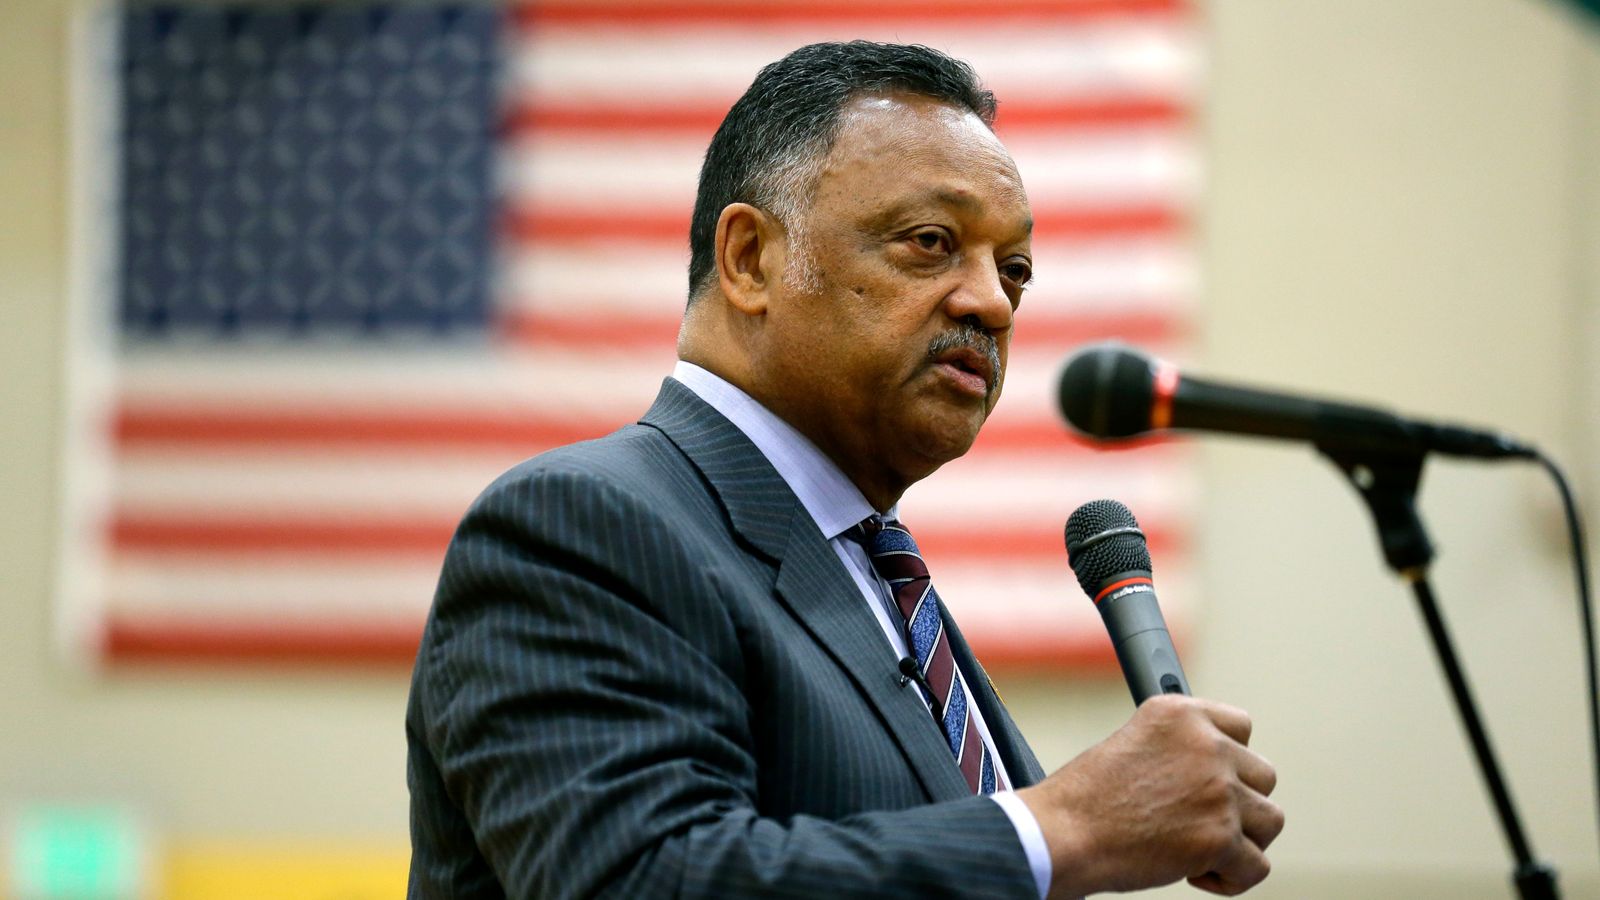 Civil rights leader Jesse Jackson and wife admitted to ...